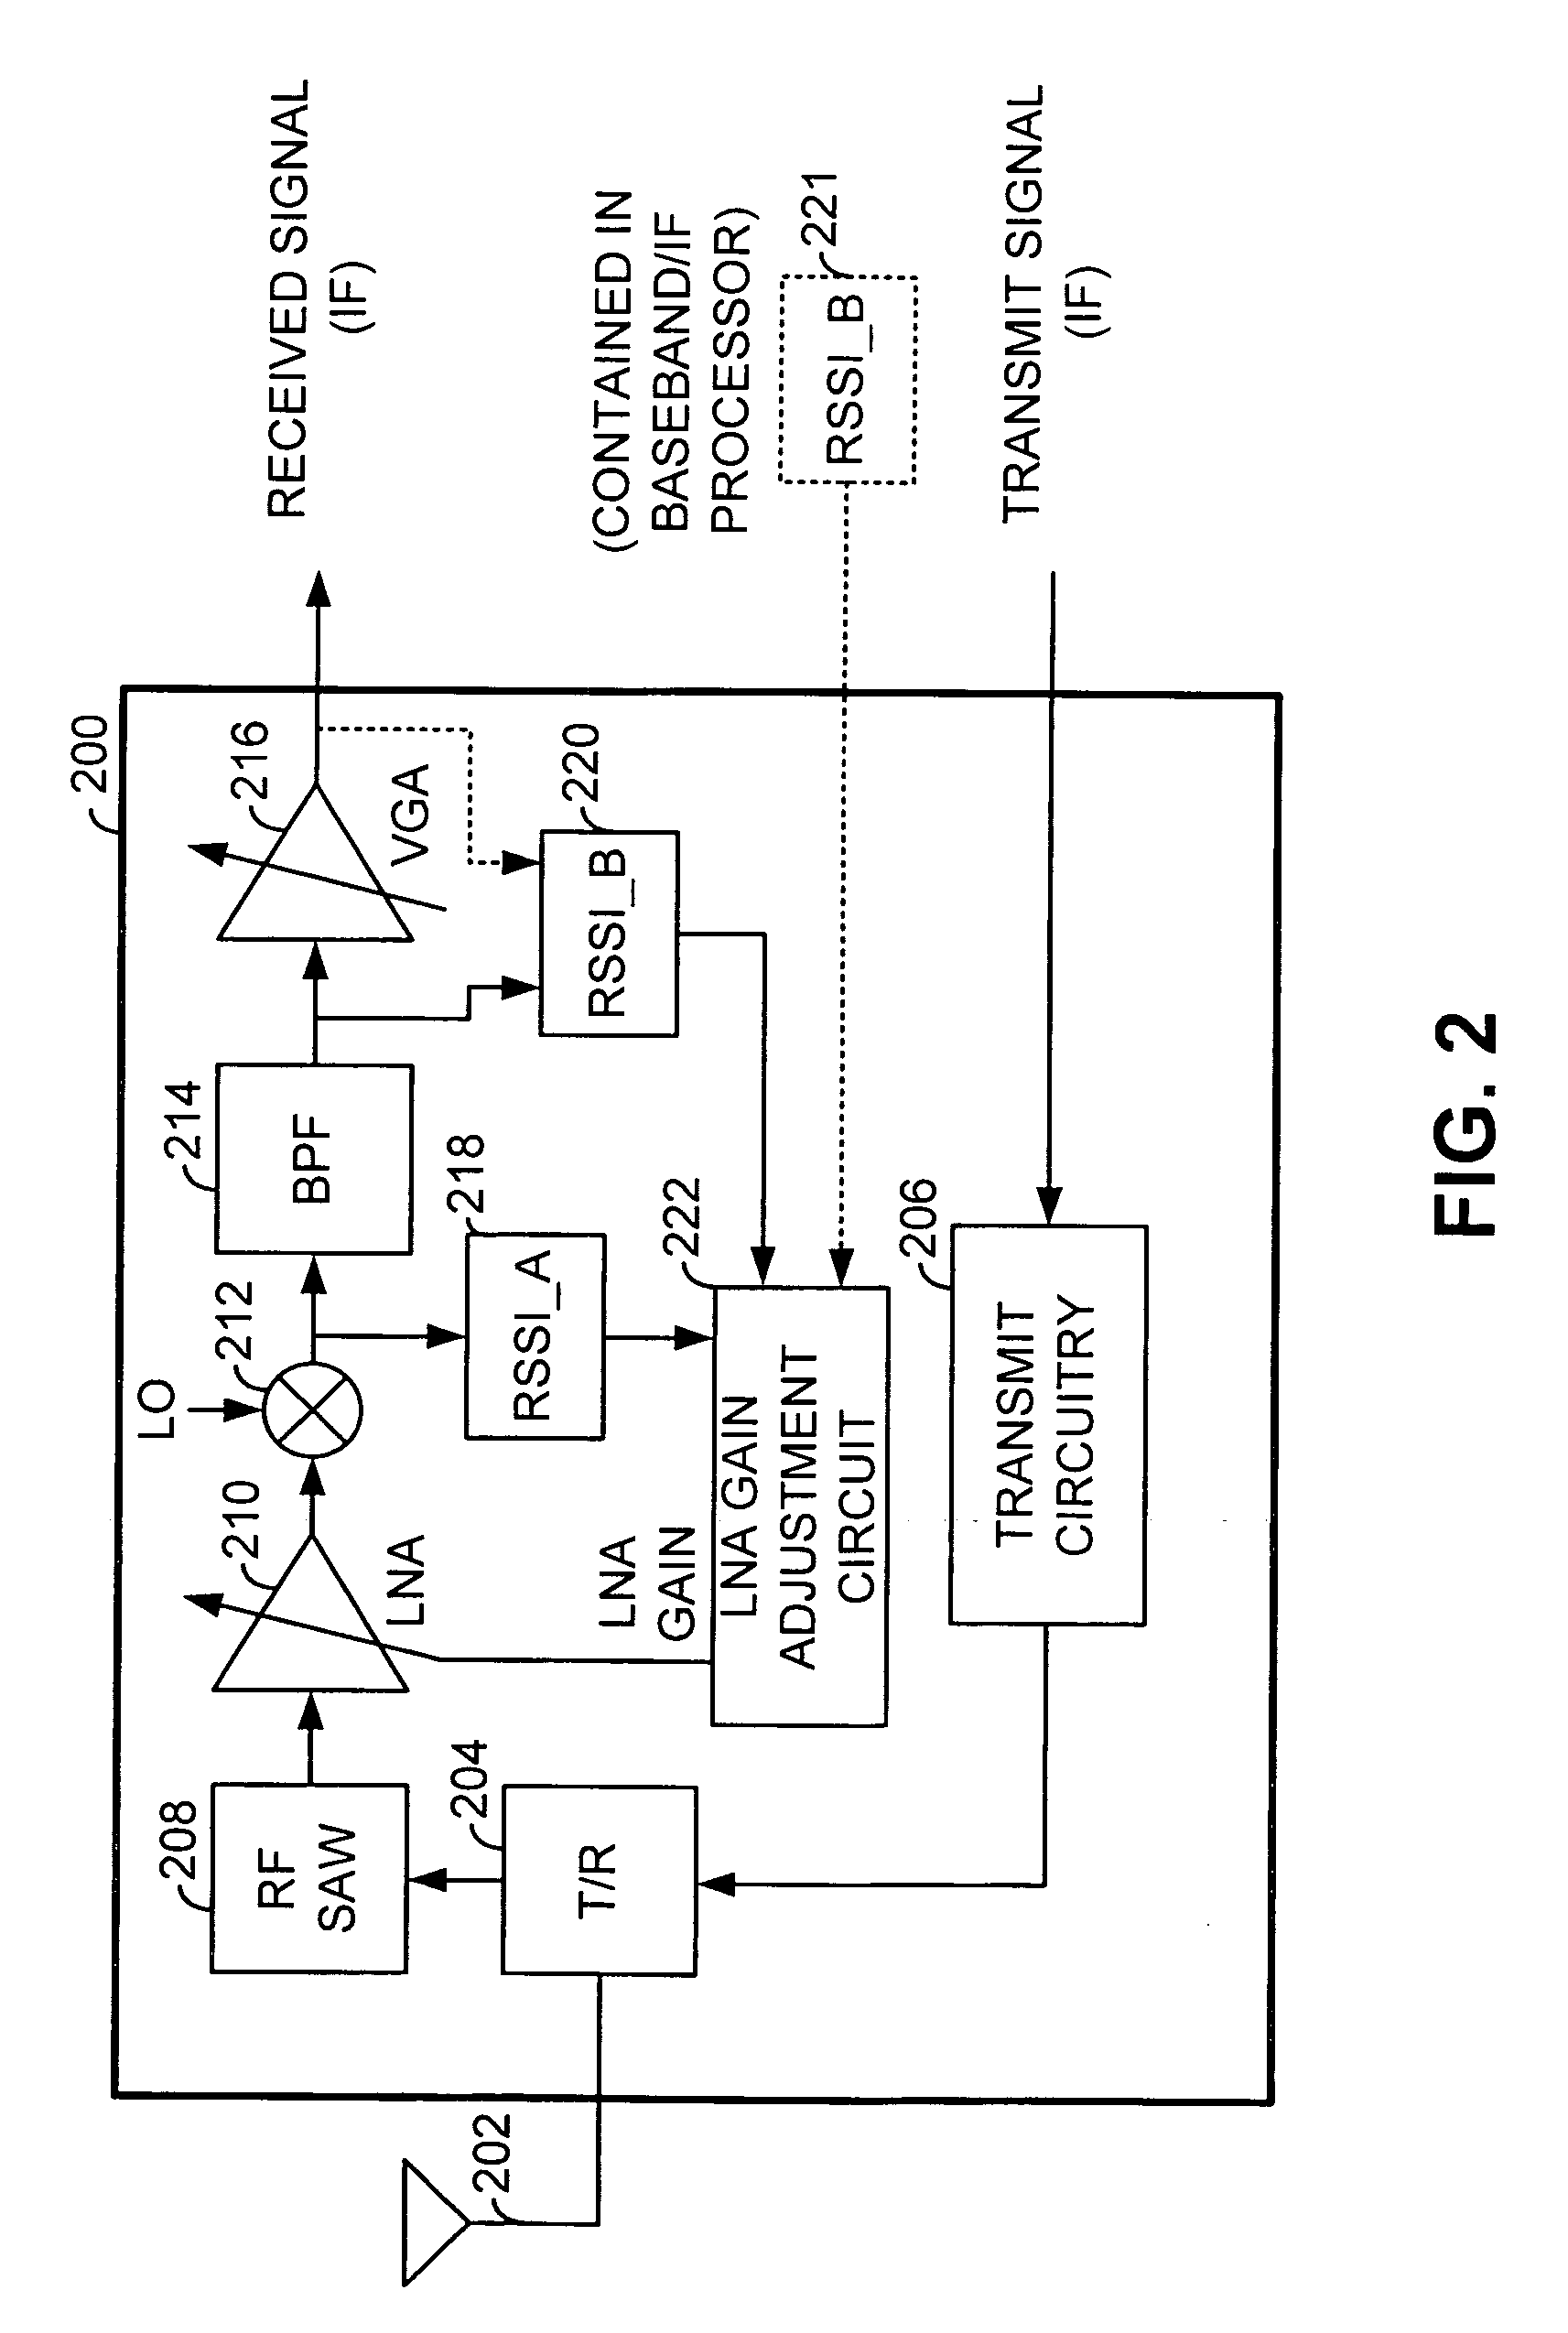 LNA gain adjustment in an RF receiver to compensate for intermodulation interference